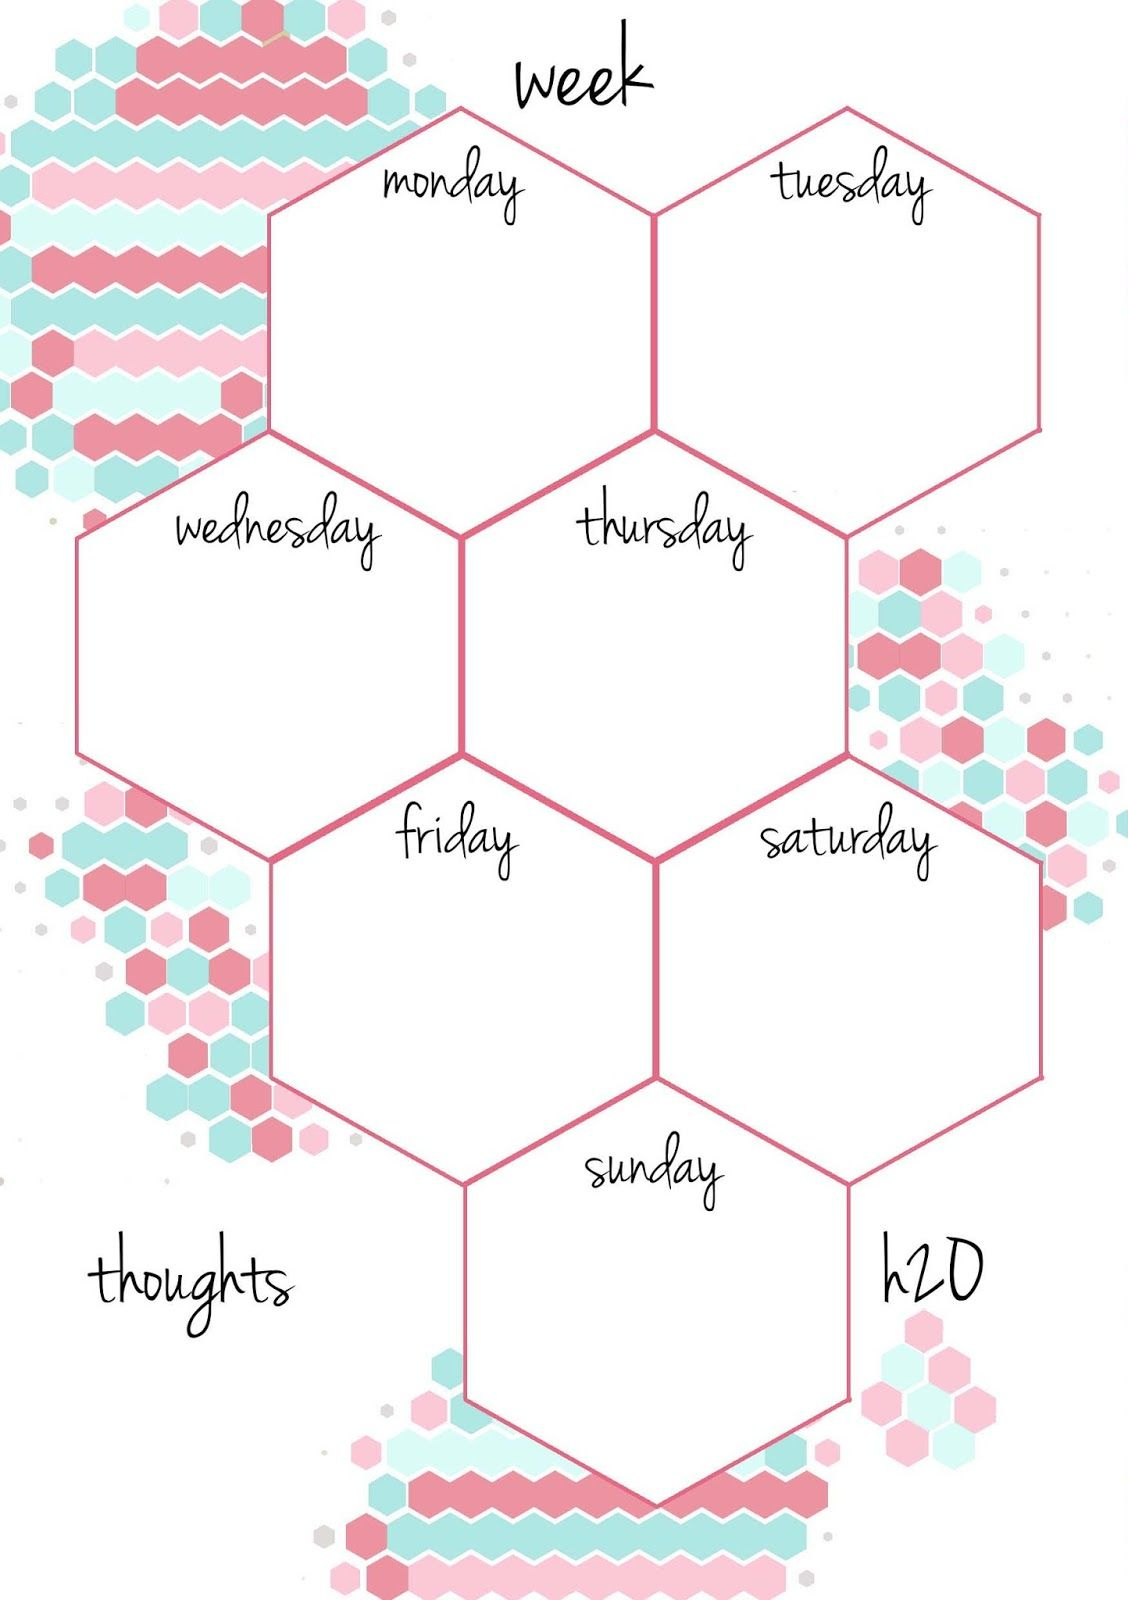 Pb And J Studio: Free Printable Planner Inserts Candy Hexagon In A5 - Free Printable Agenda 2017